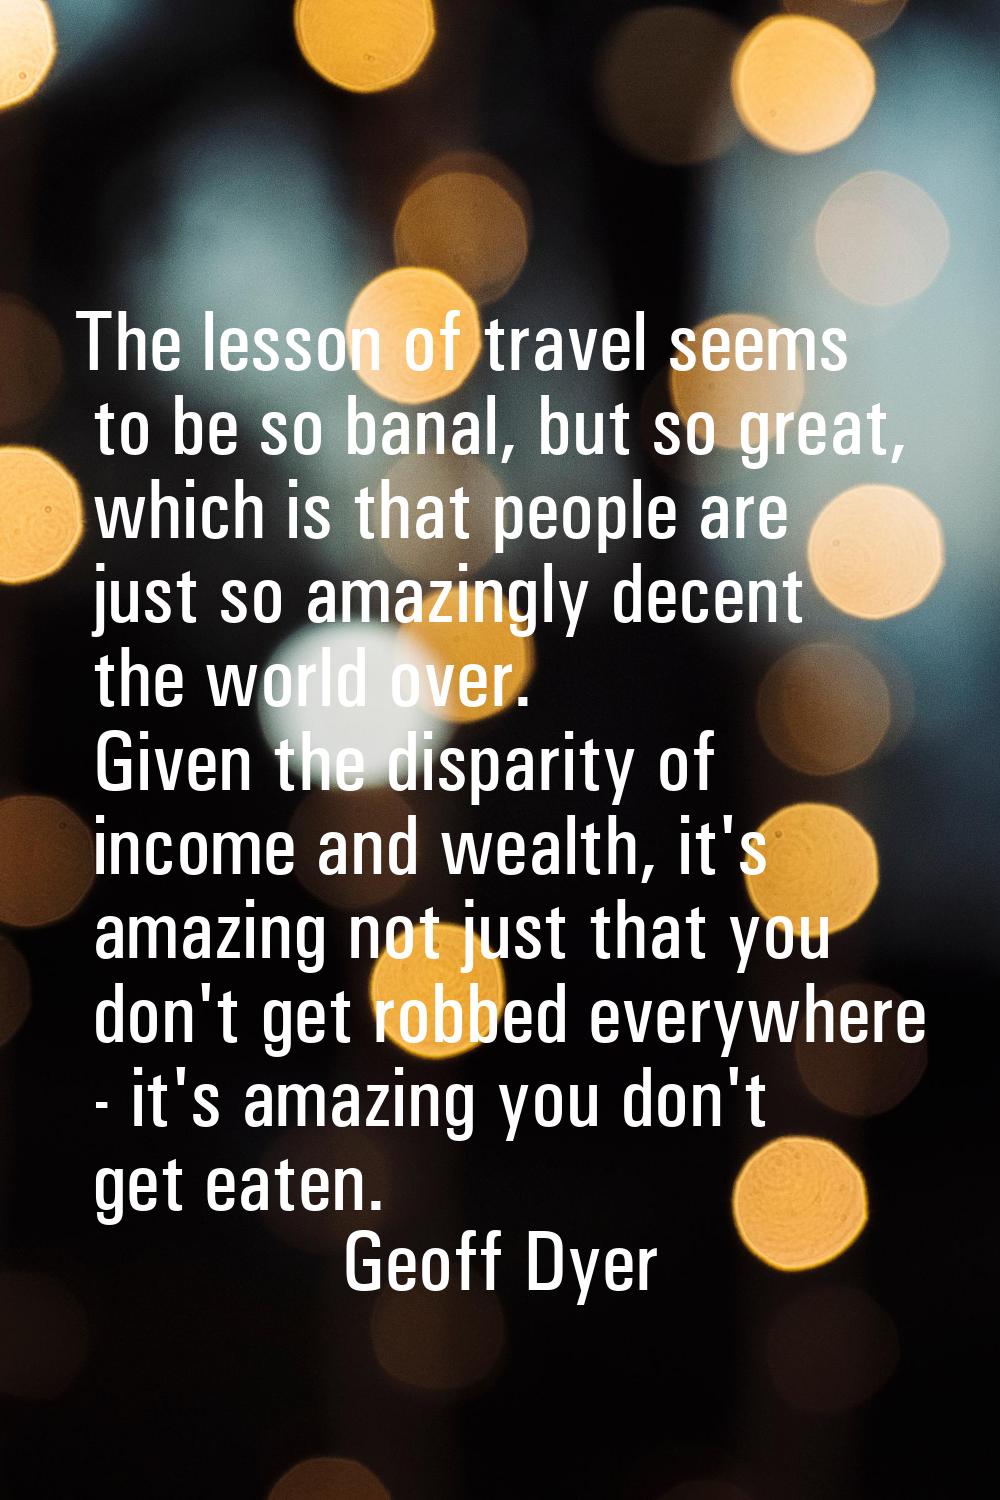 The lesson of travel seems to be so banal, but so great, which is that people are just so amazingly